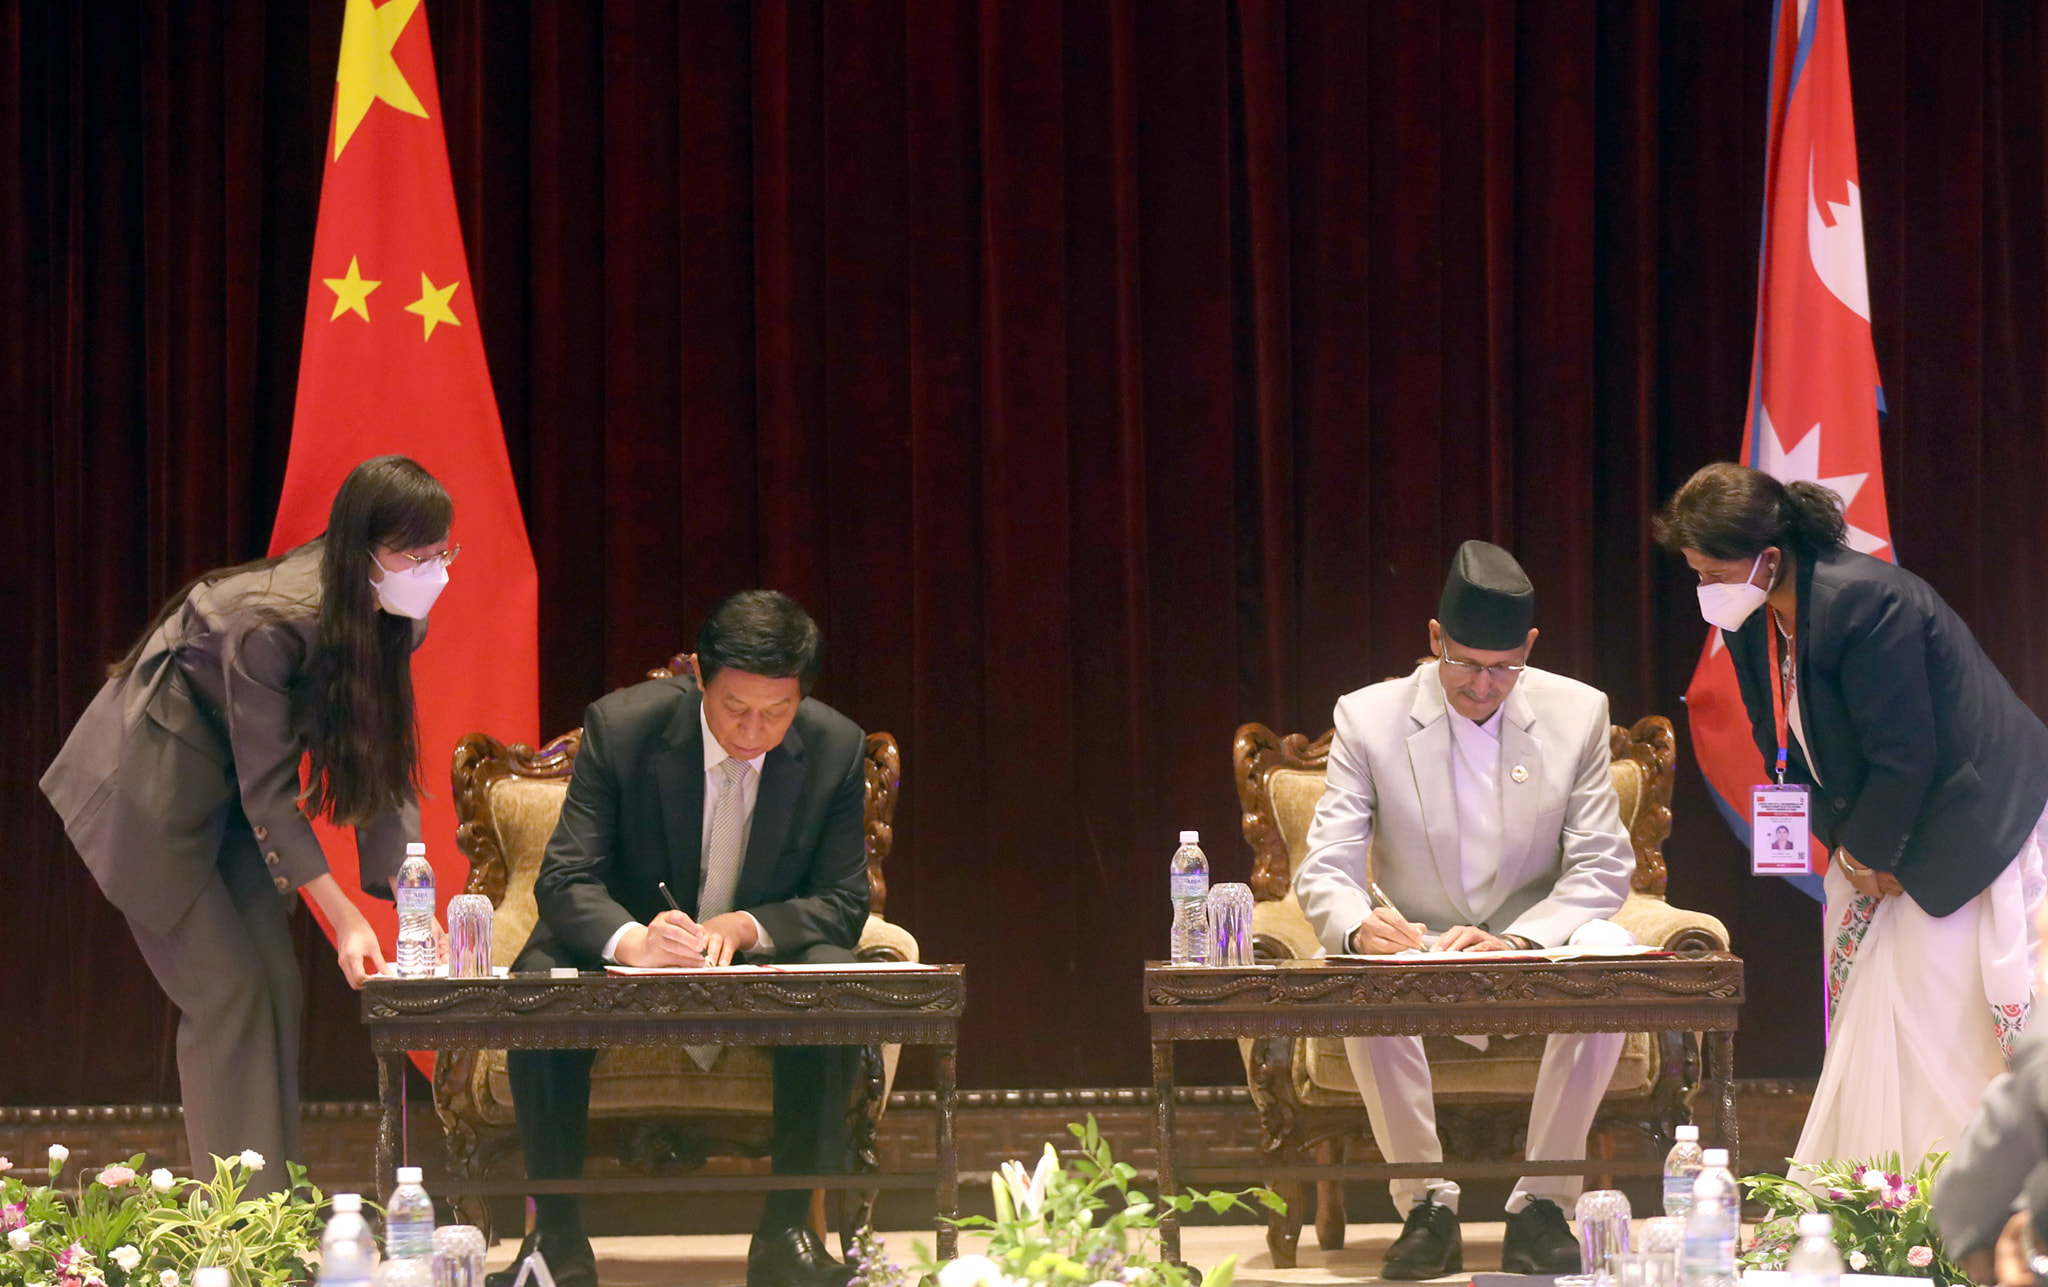 Federal Parliament of Nepal and National People’s Congress of China sign six-point Memorandum of Understanding